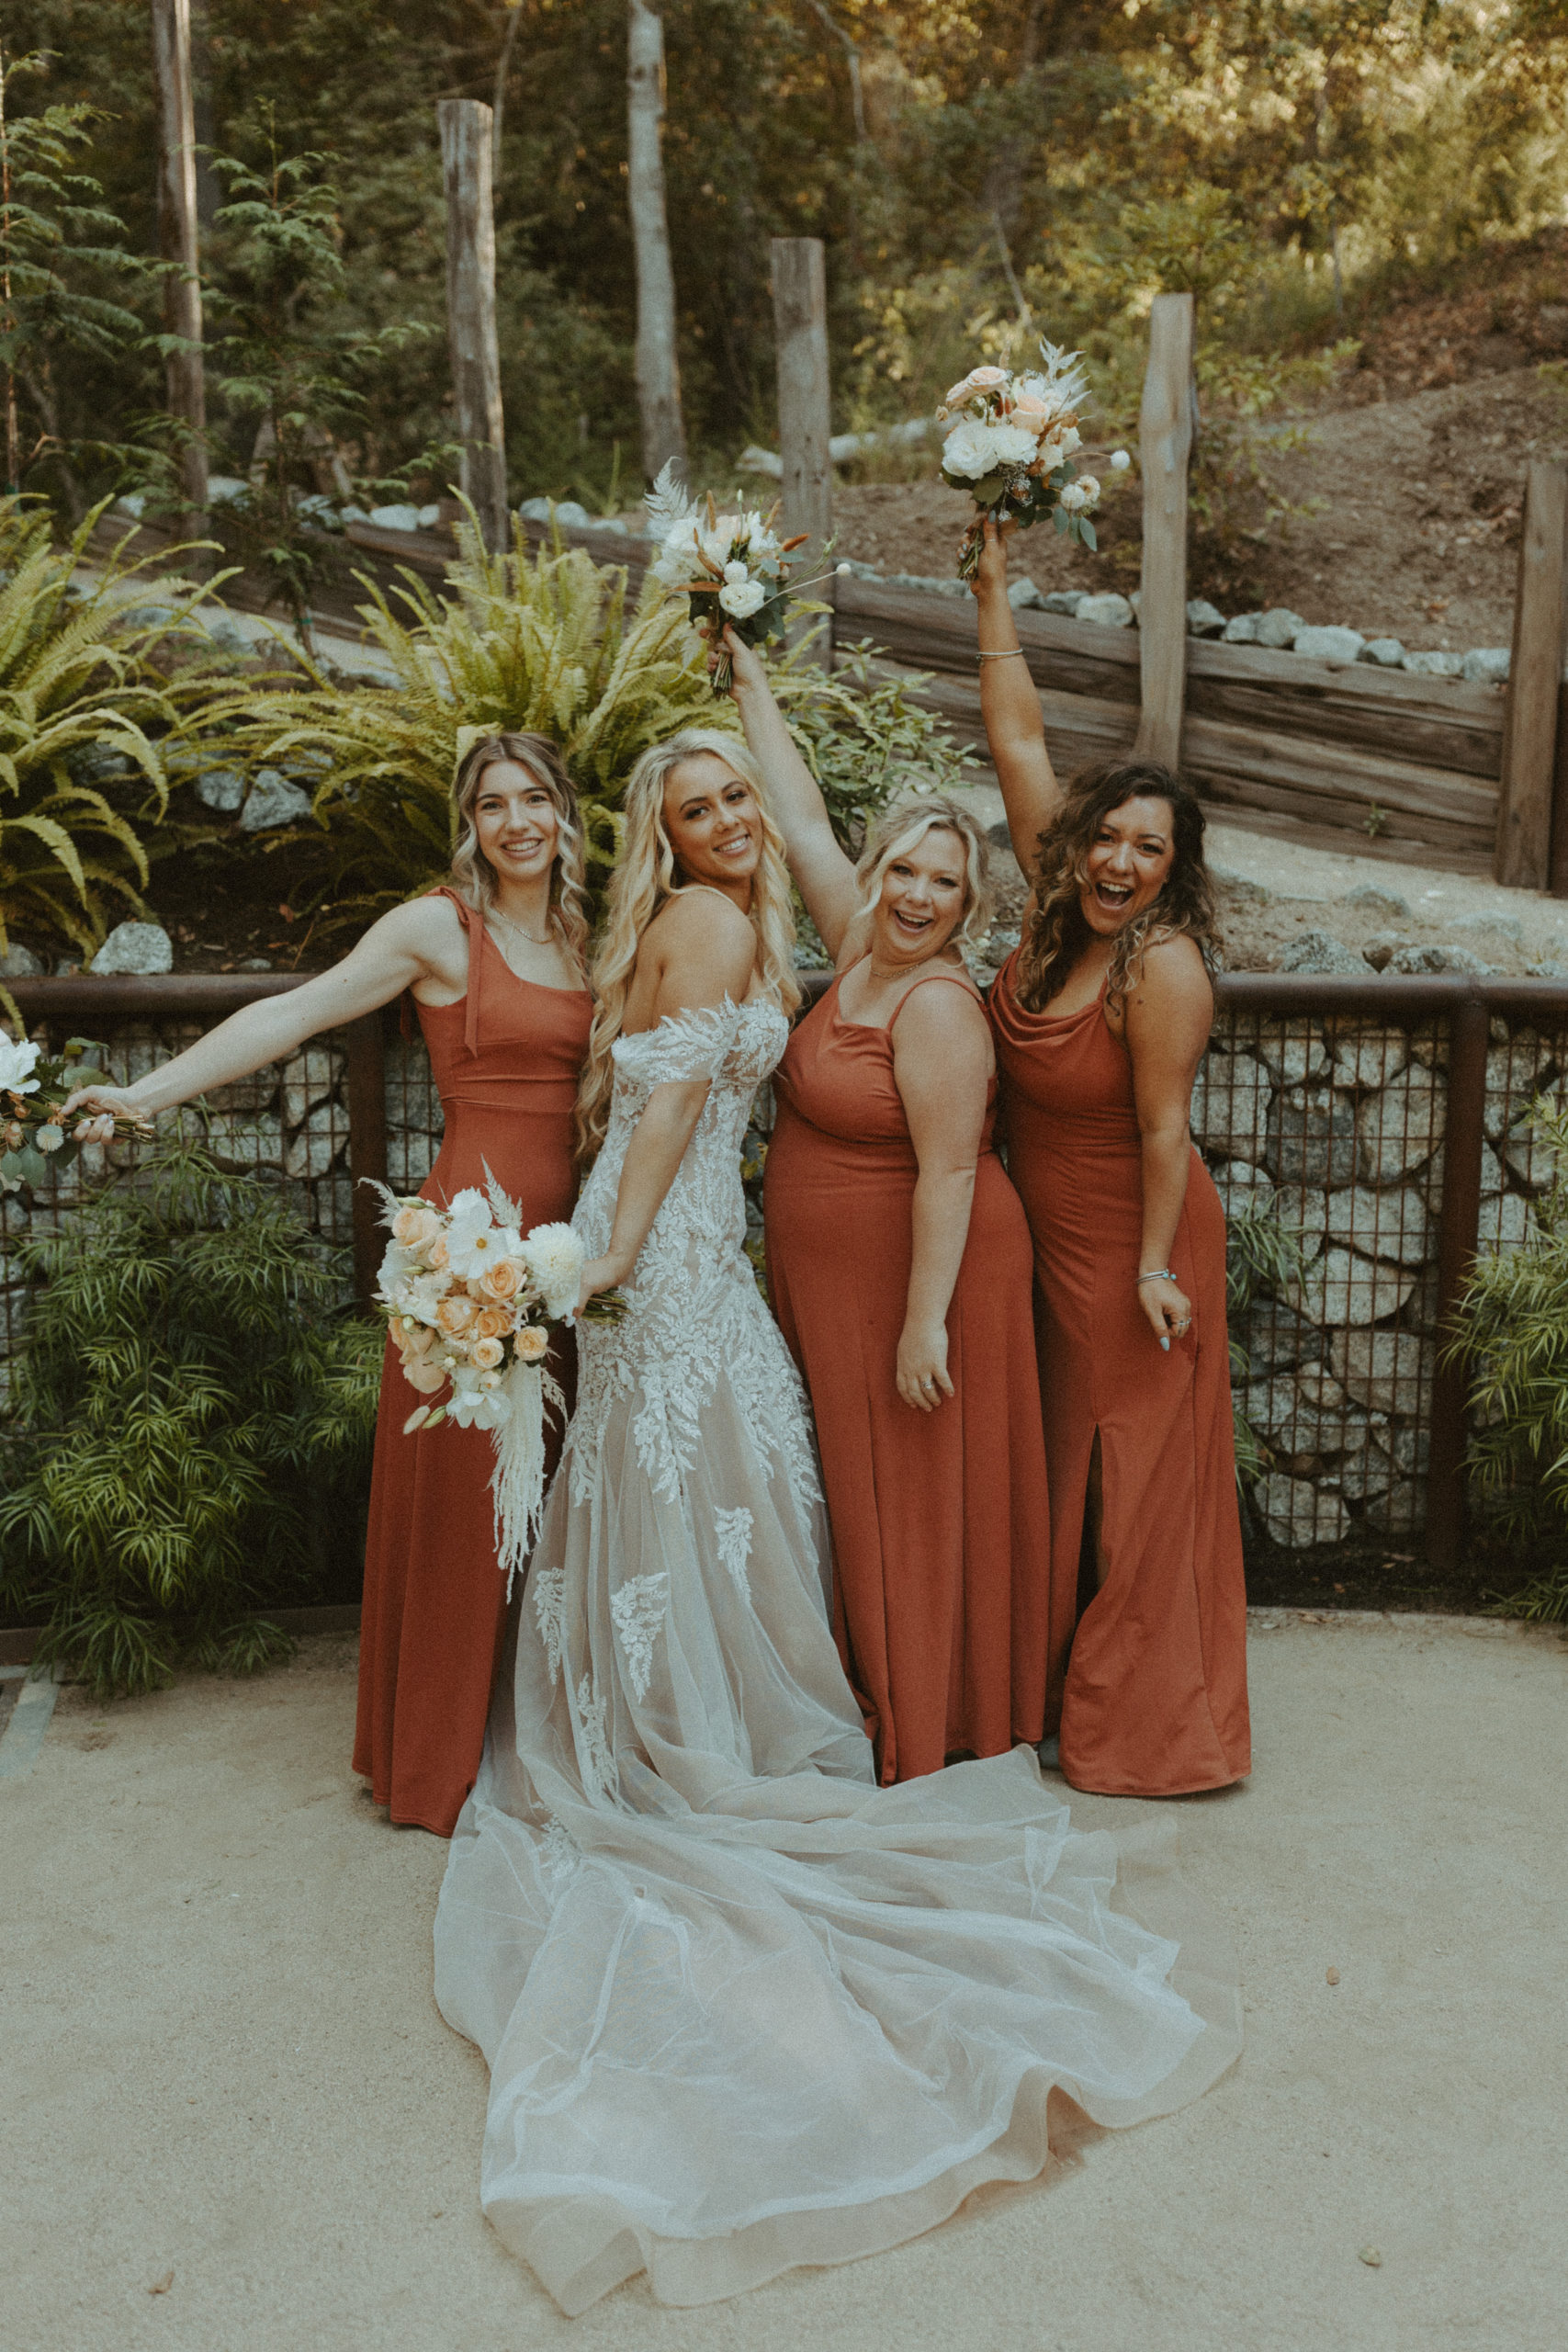 the bridesmaids lifting their bouquet with the bride